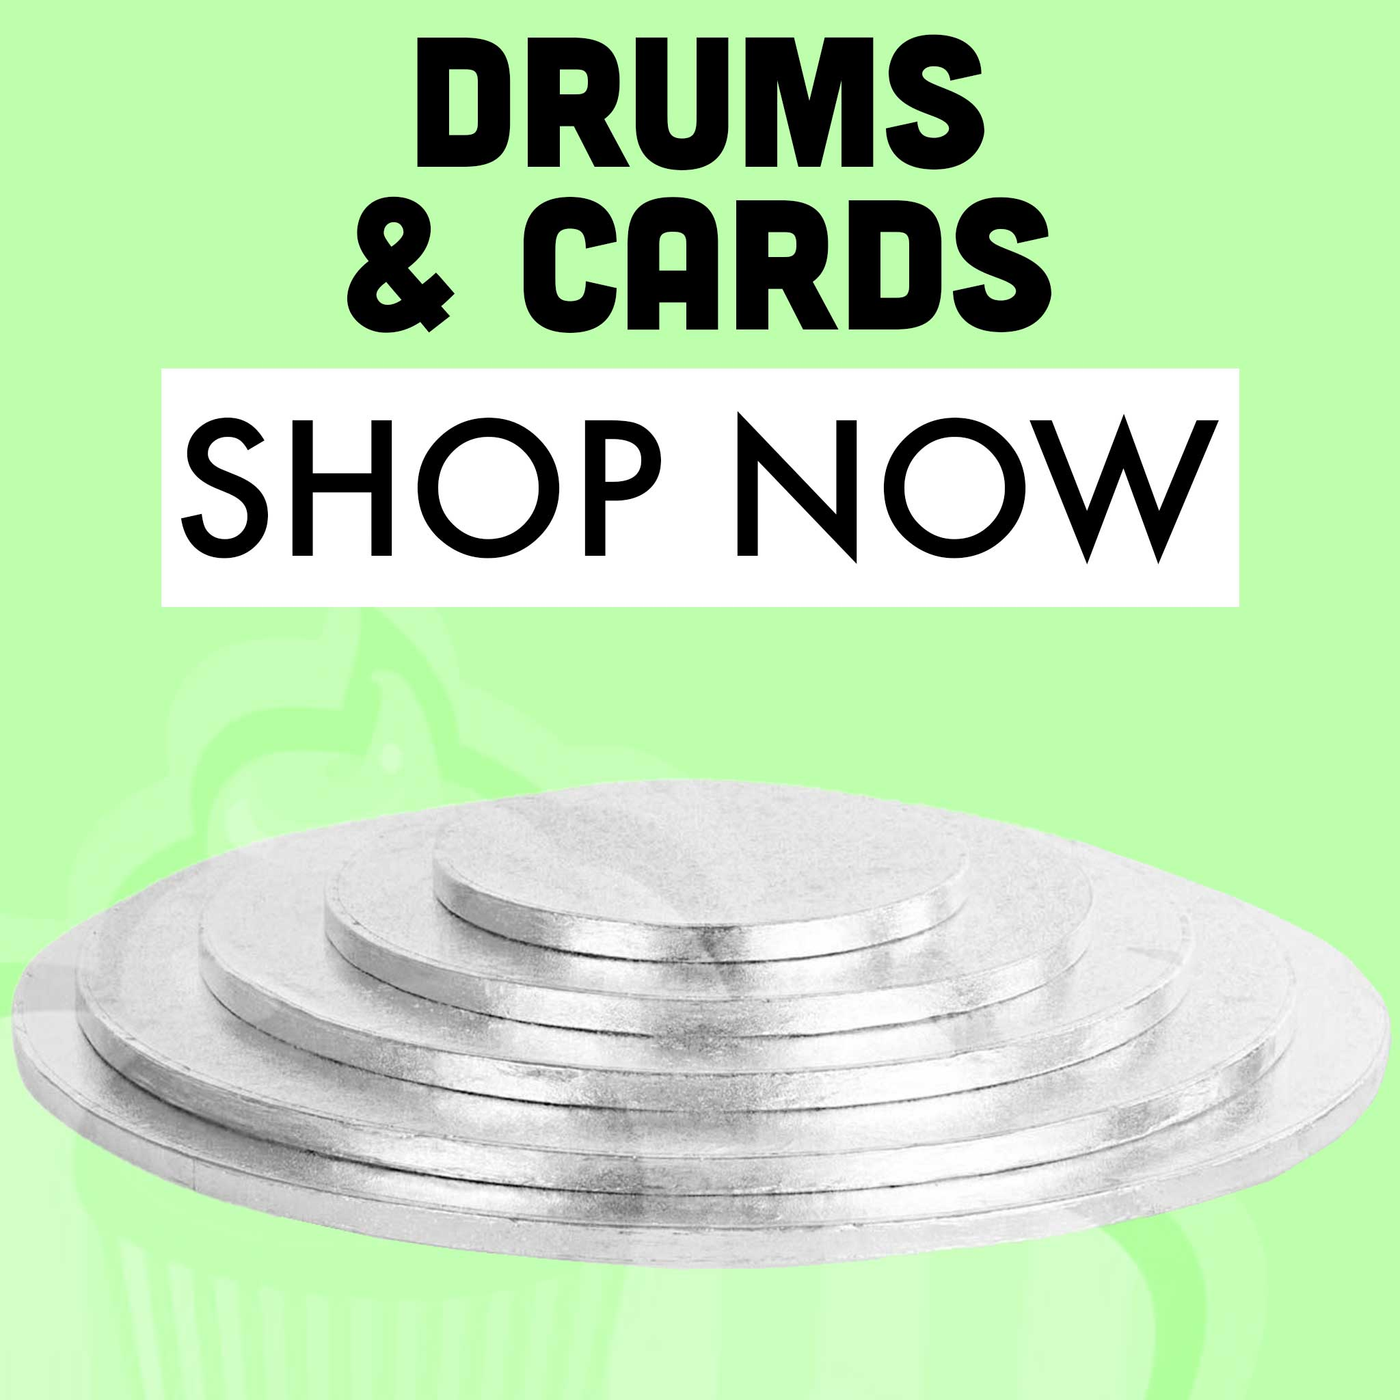 Cake Drums & Cards